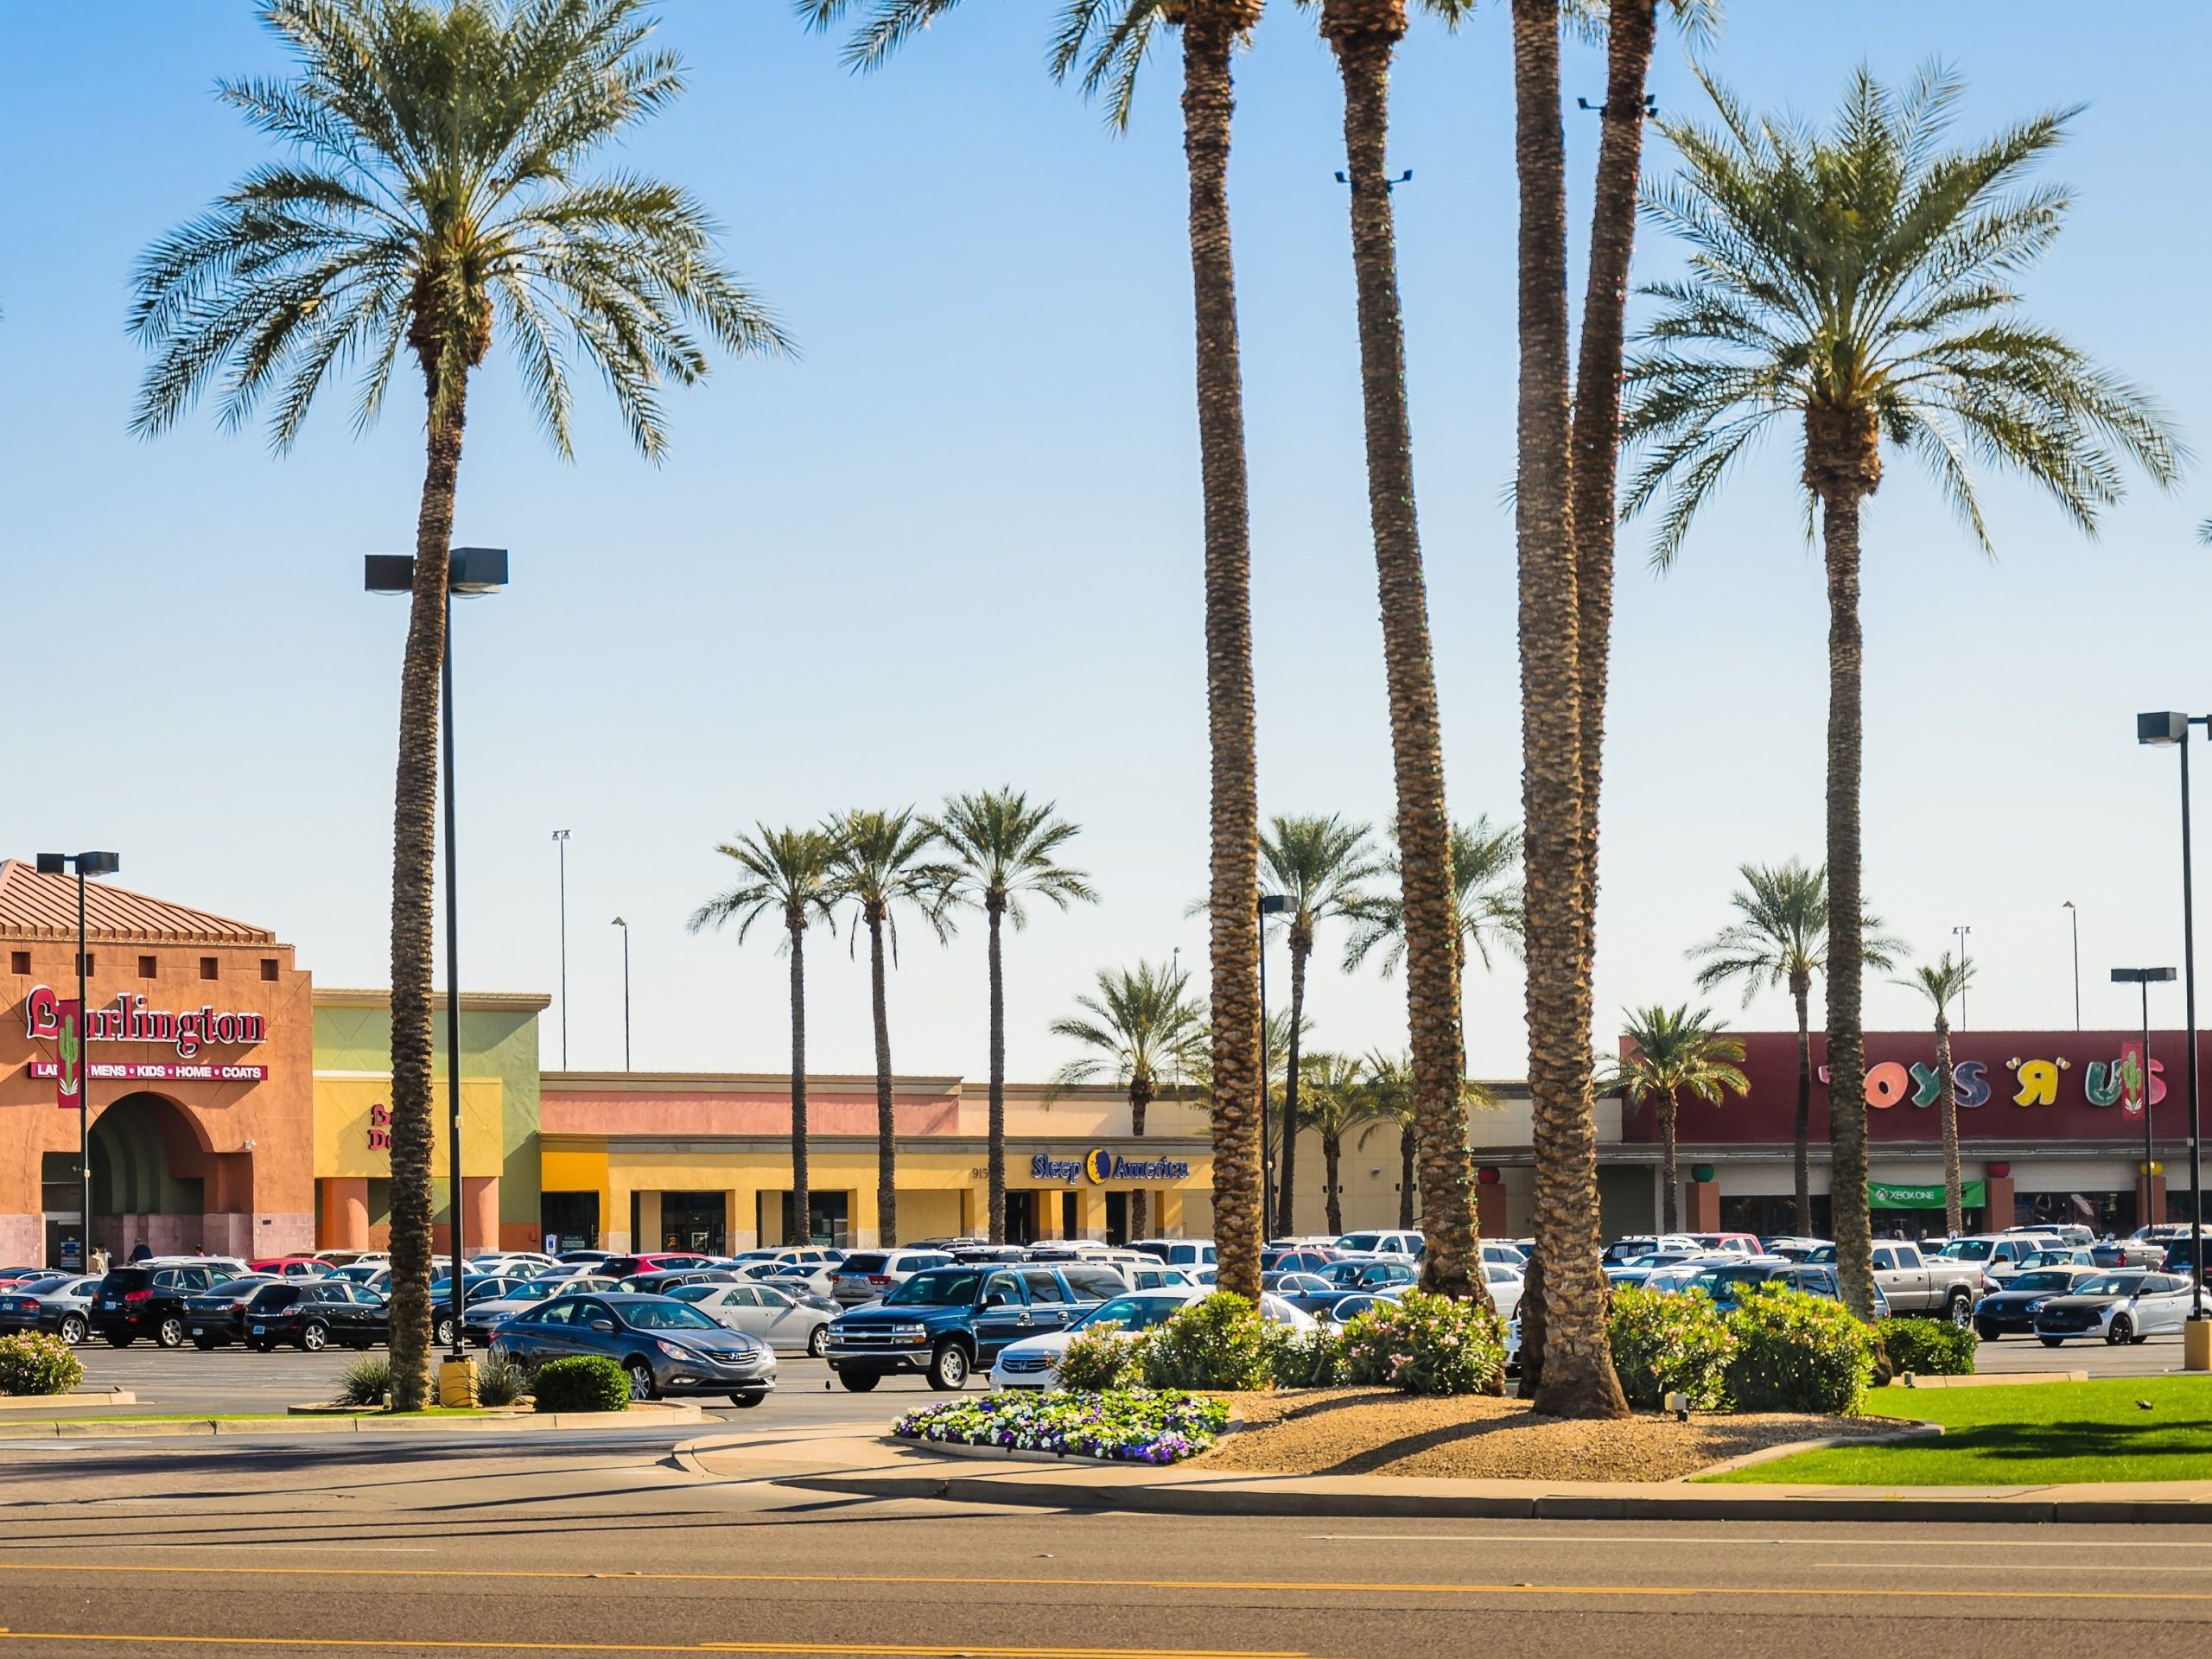 Cars gather in the parking lots outside of the Pavilions at Talking Stick shopping center in Salt River, Arizona.